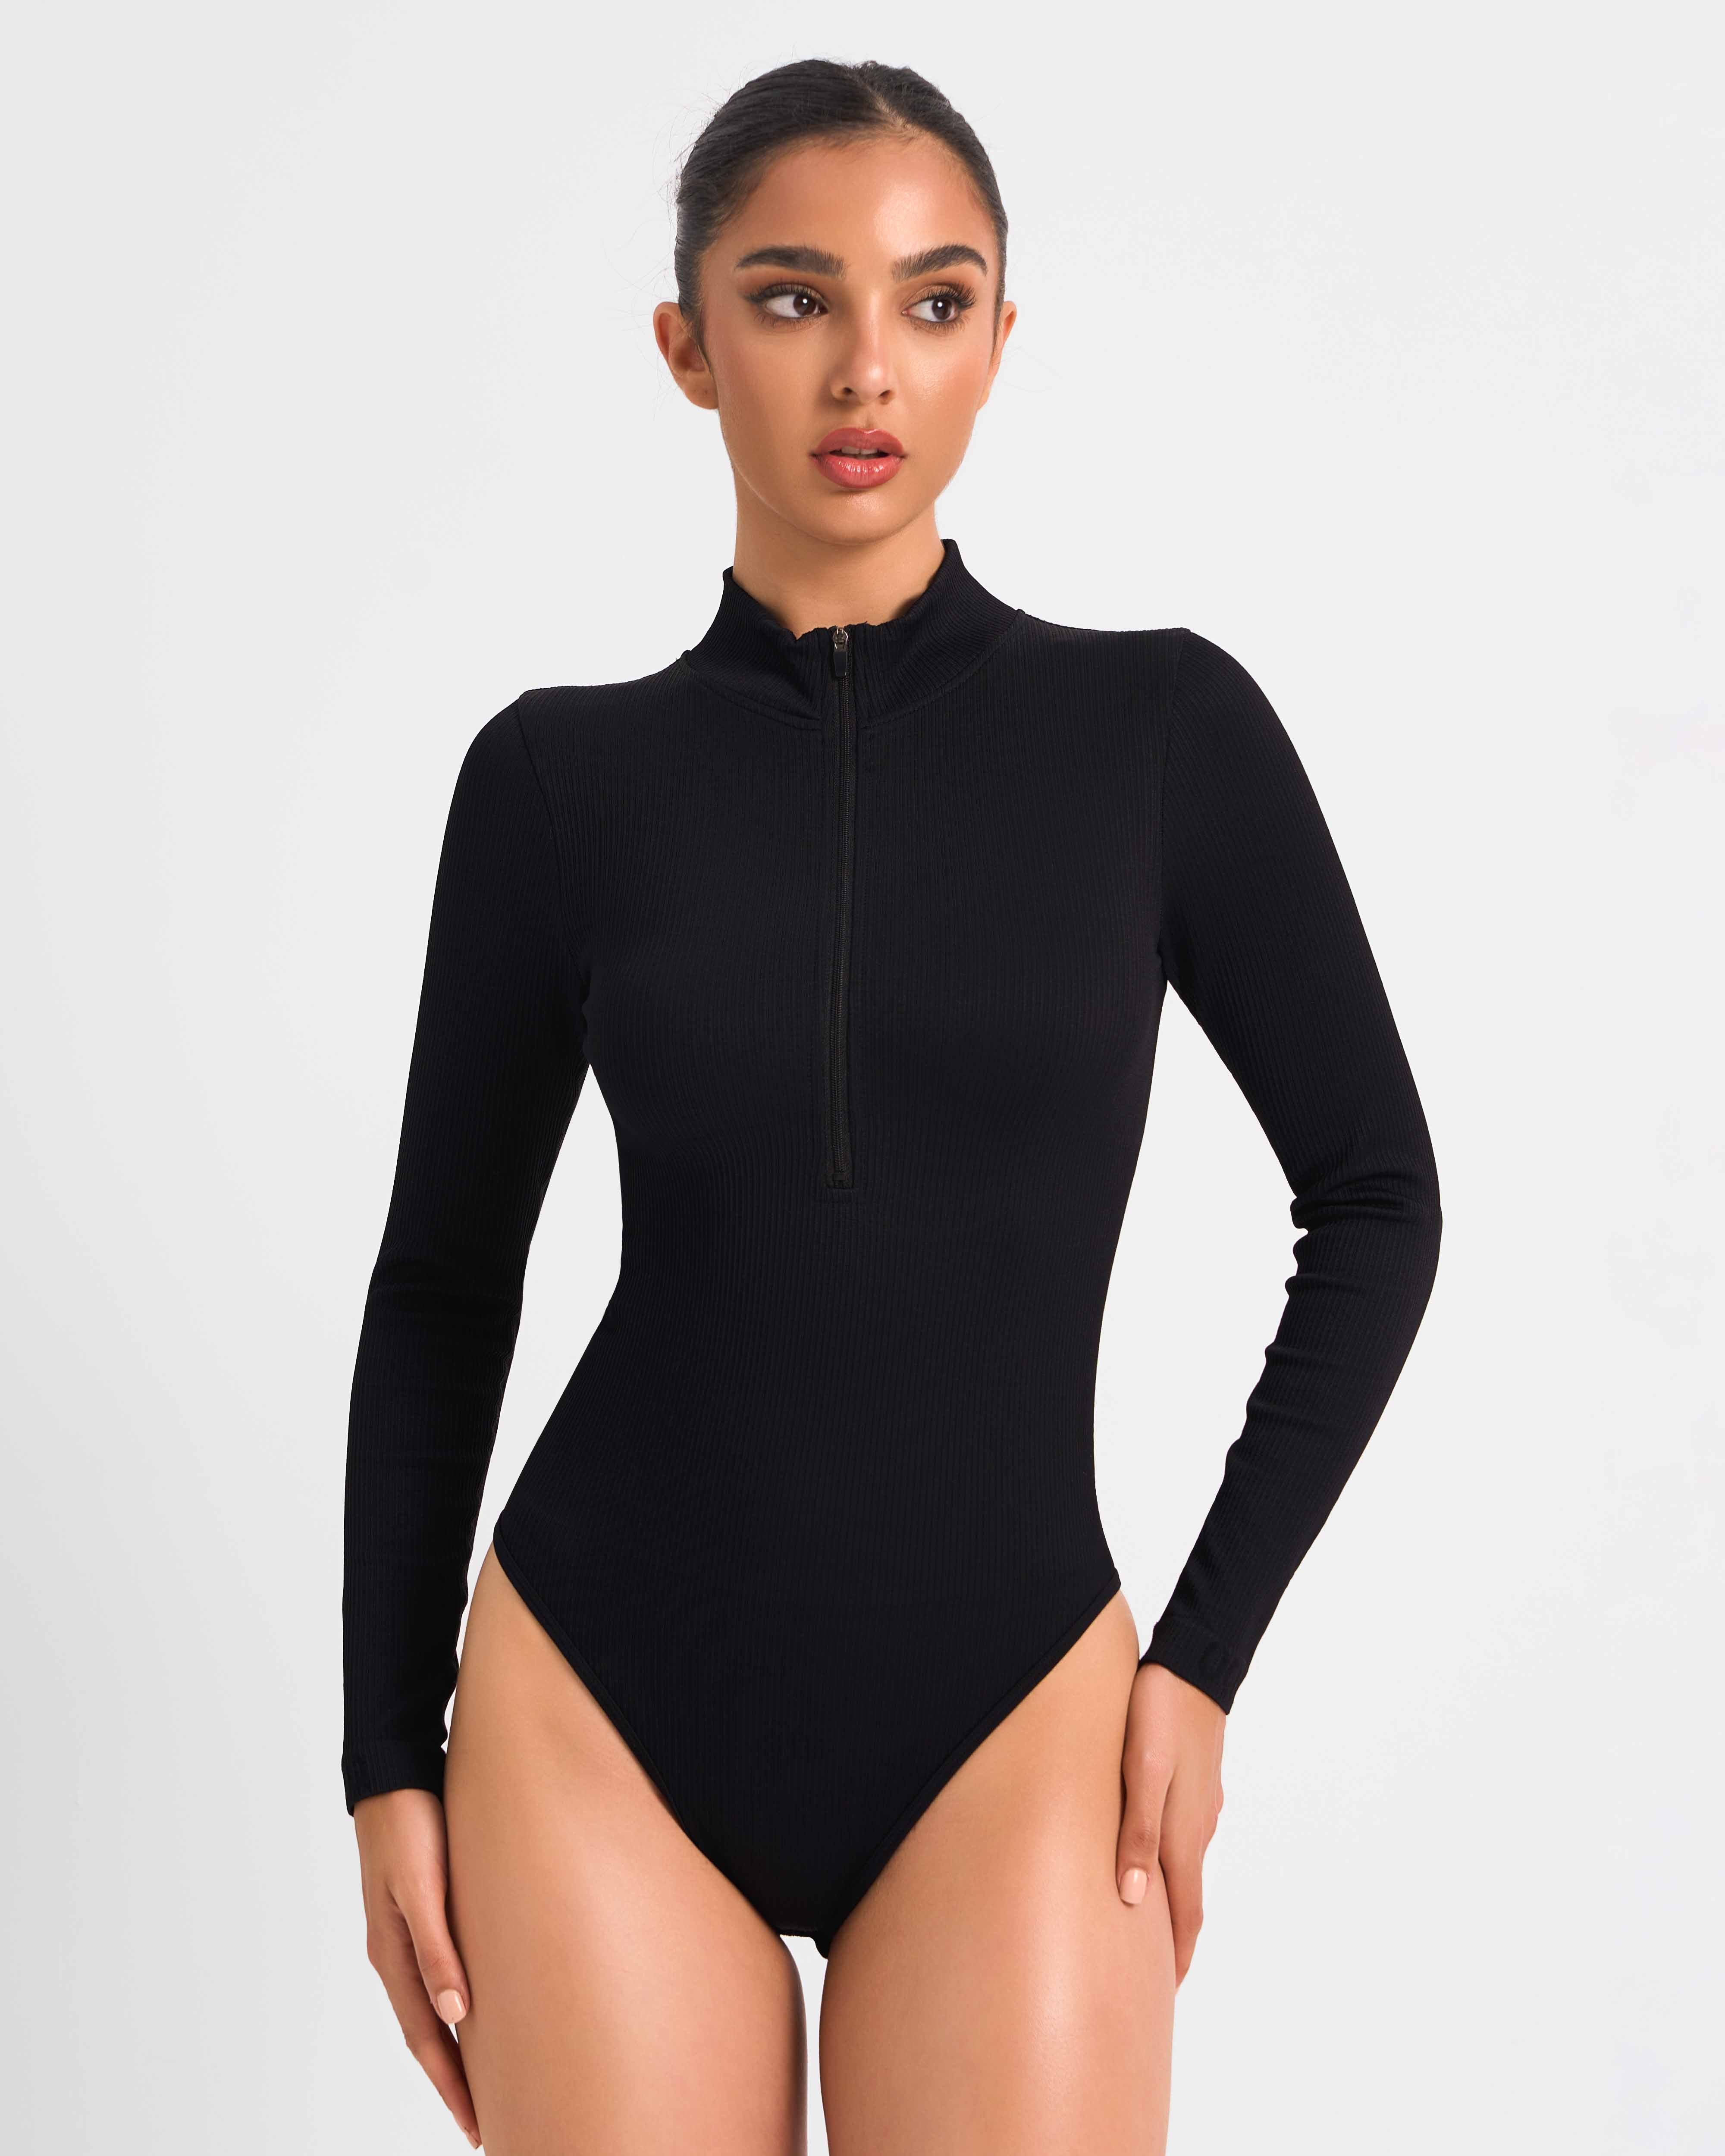  OQQ Bodysuits for Women 2 Piece Sexy Ribbed Long